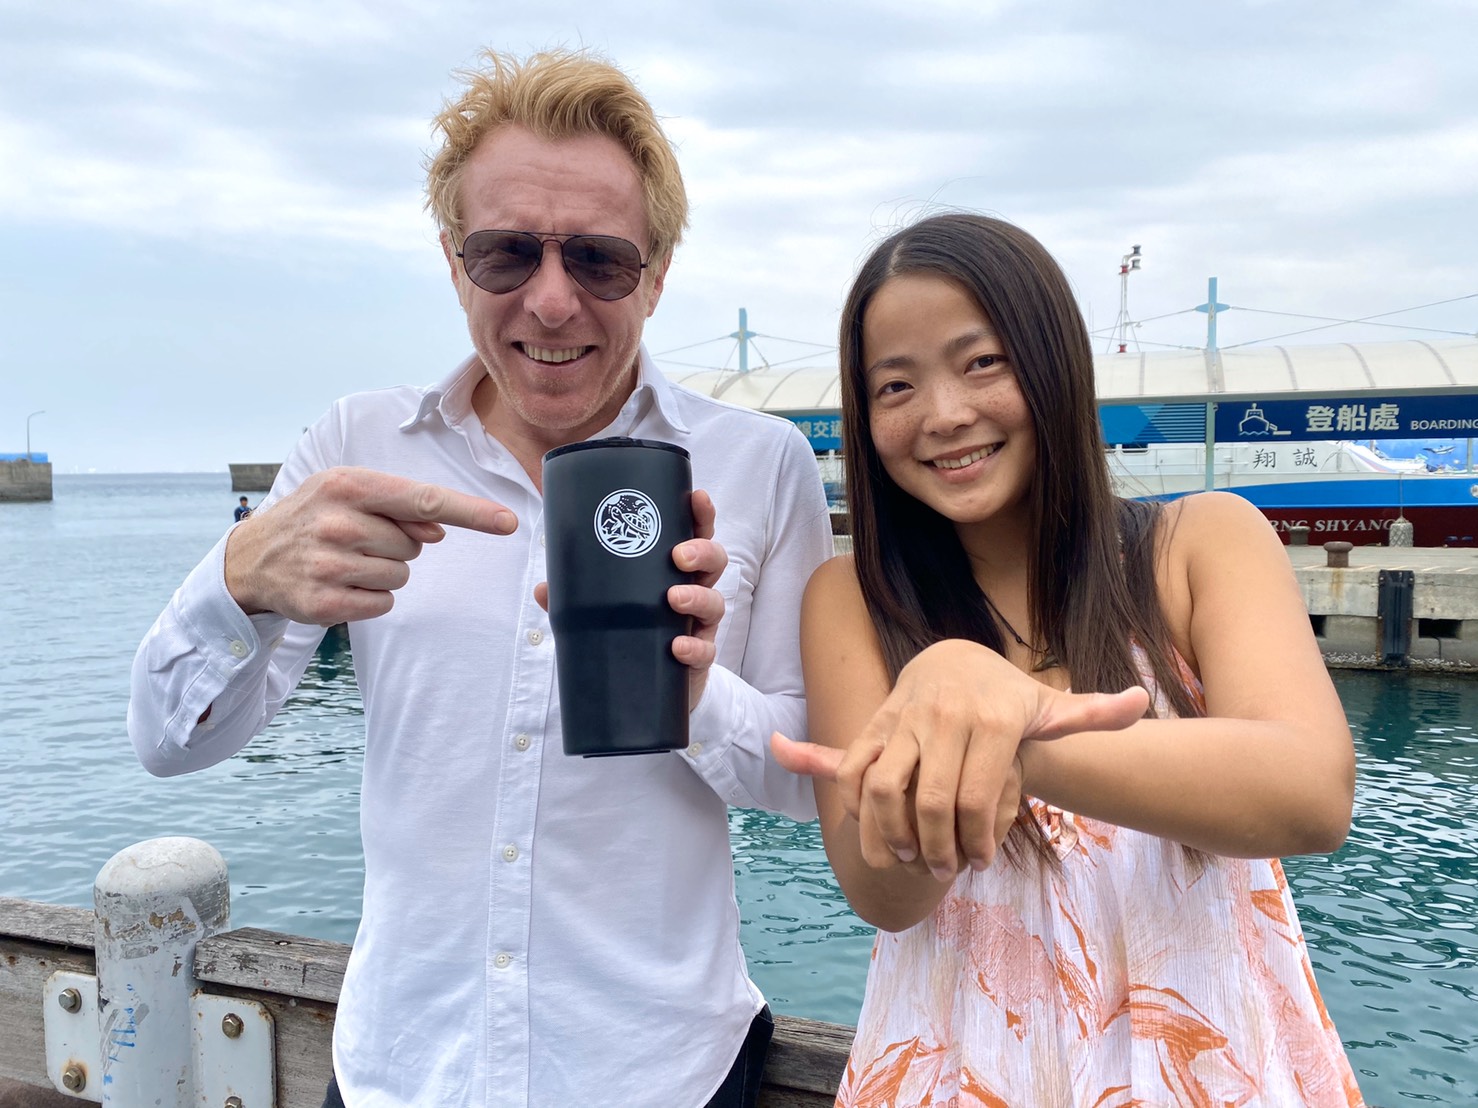 TV host Jérôme Pitorin happily took a photo with Lynn Mo upon receiving a mug from Legend of Little Liuqiu as a gift. (Photo courtesy: Lynn Mo)